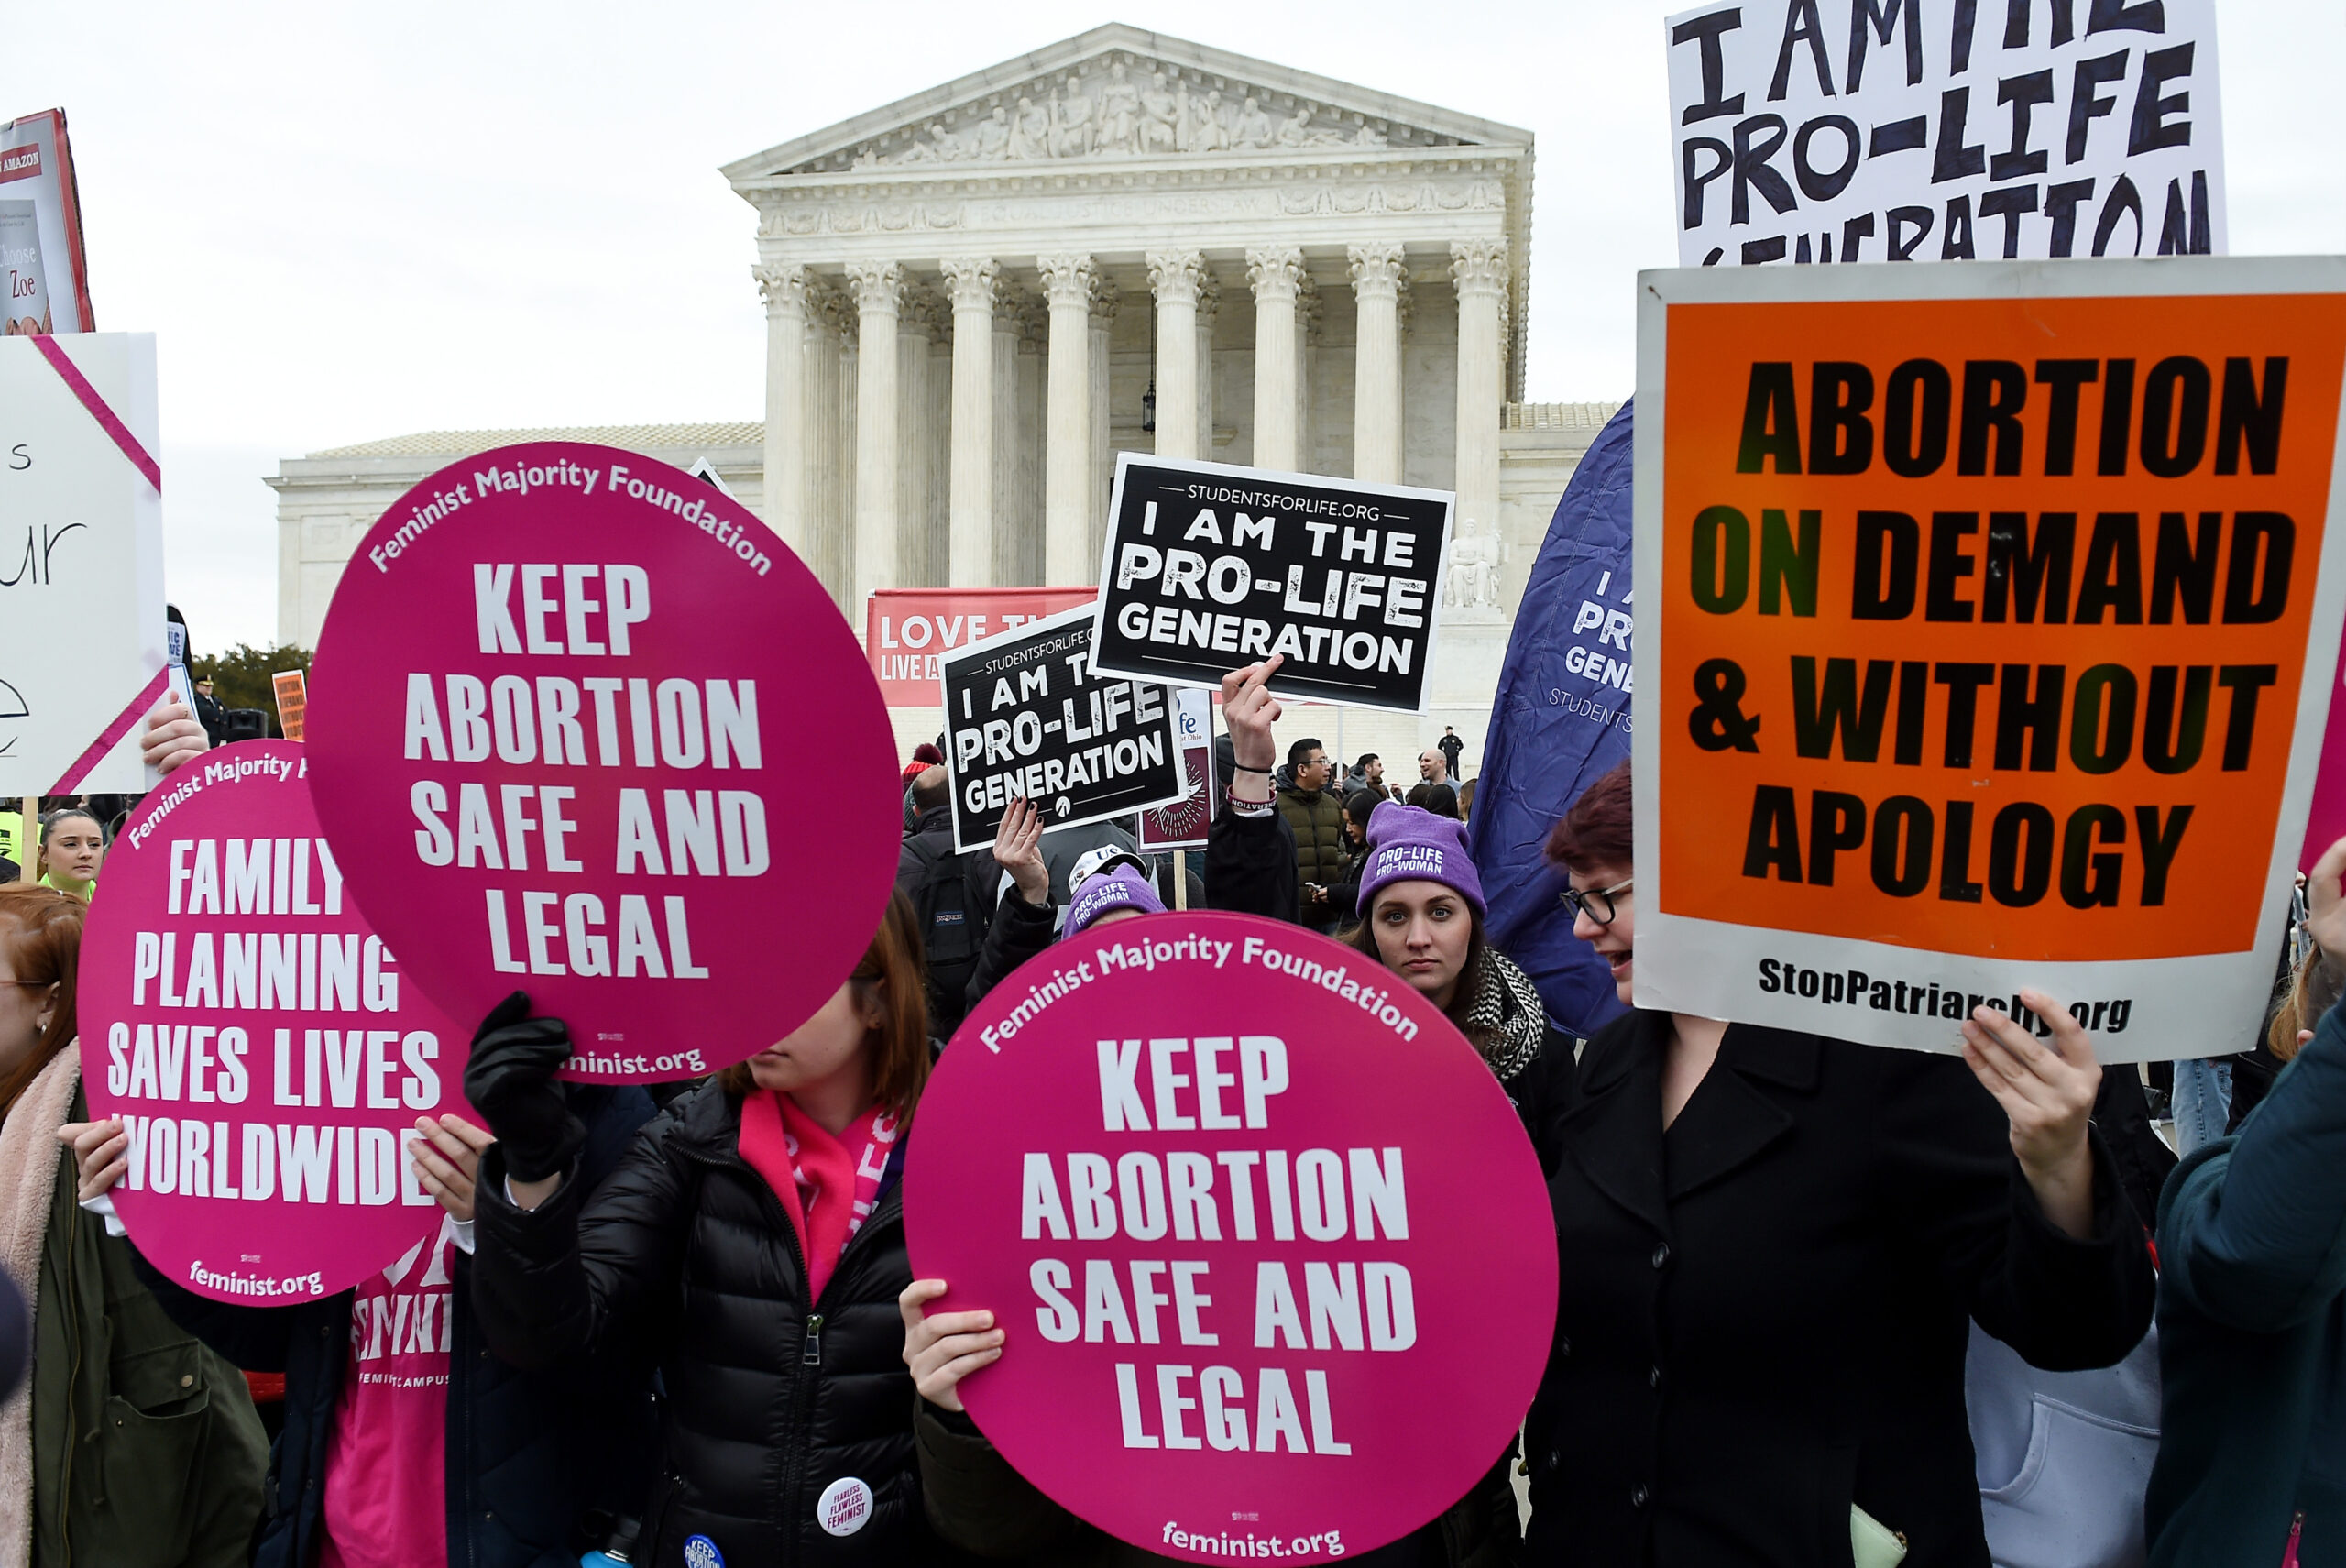 50 Years Of Roe V. Wade: Where Do We Go From Here?